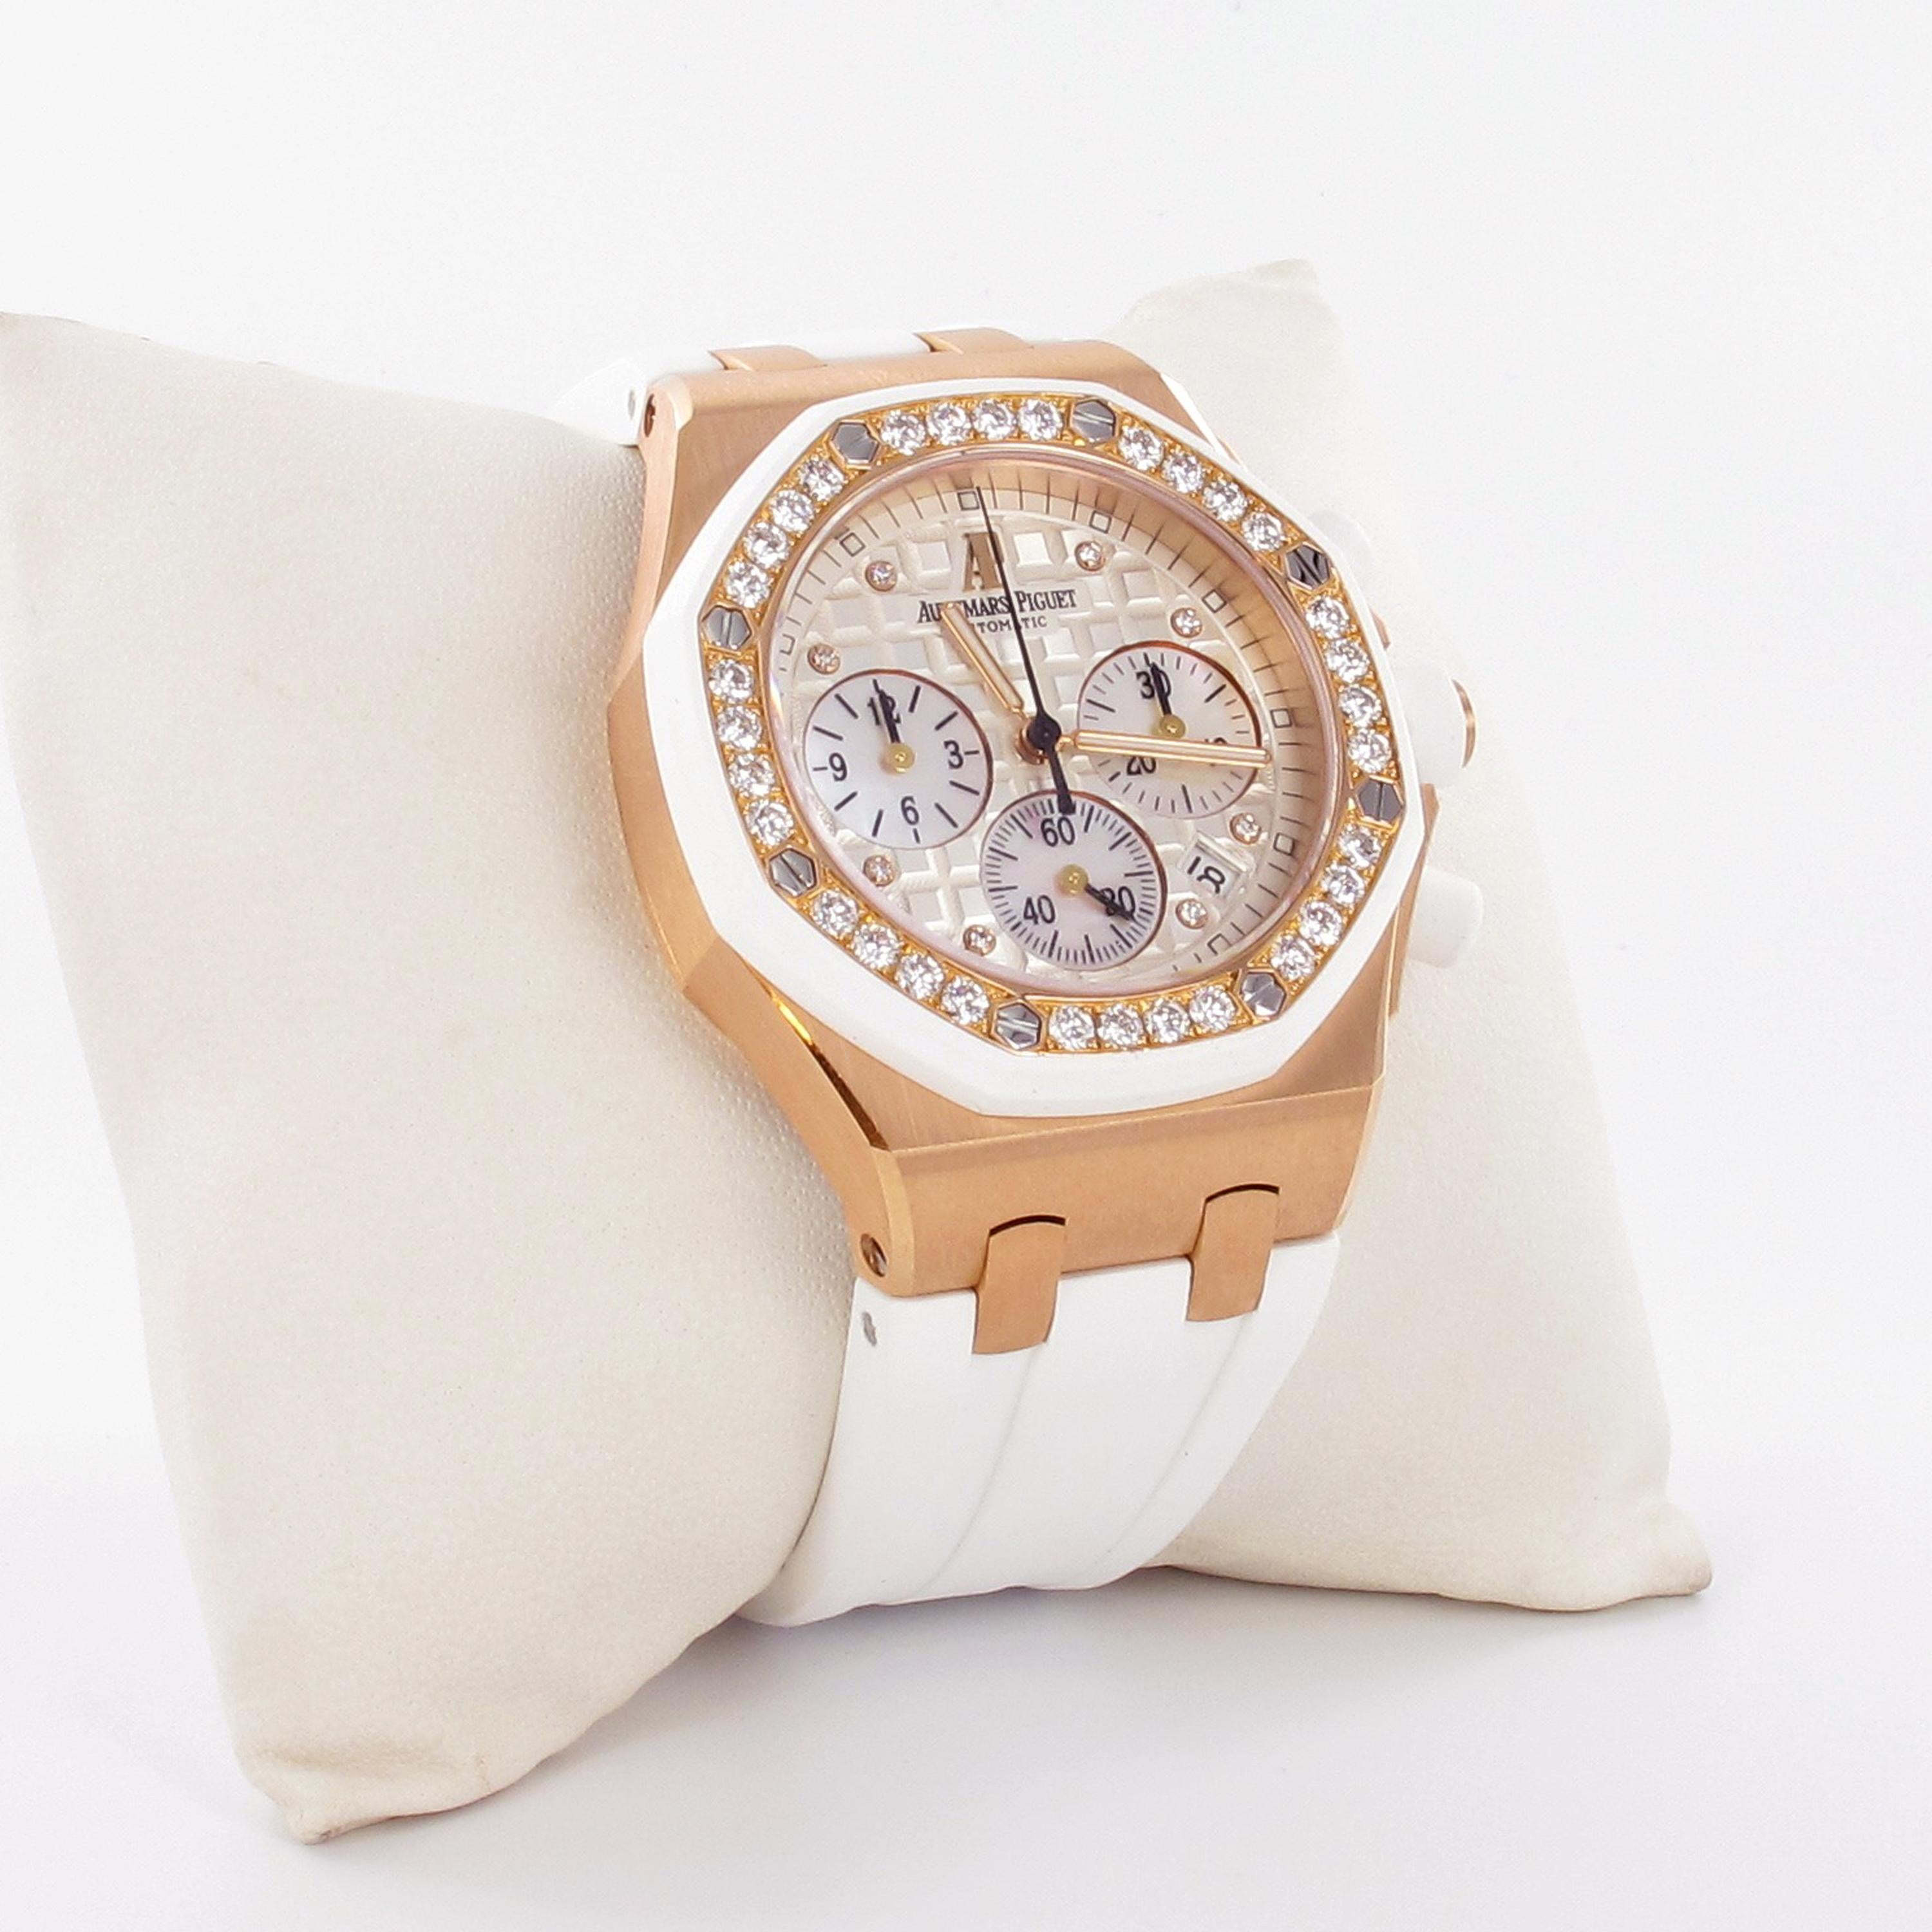 Fine Audemars Piguet ladies chronograph watch in 18 Karat Rose Gold. Selfwinding movement, chronograph functions with second-, minute-, and hour indication. The watch has a small second running indication at 6 o'clock and date display between 4 and